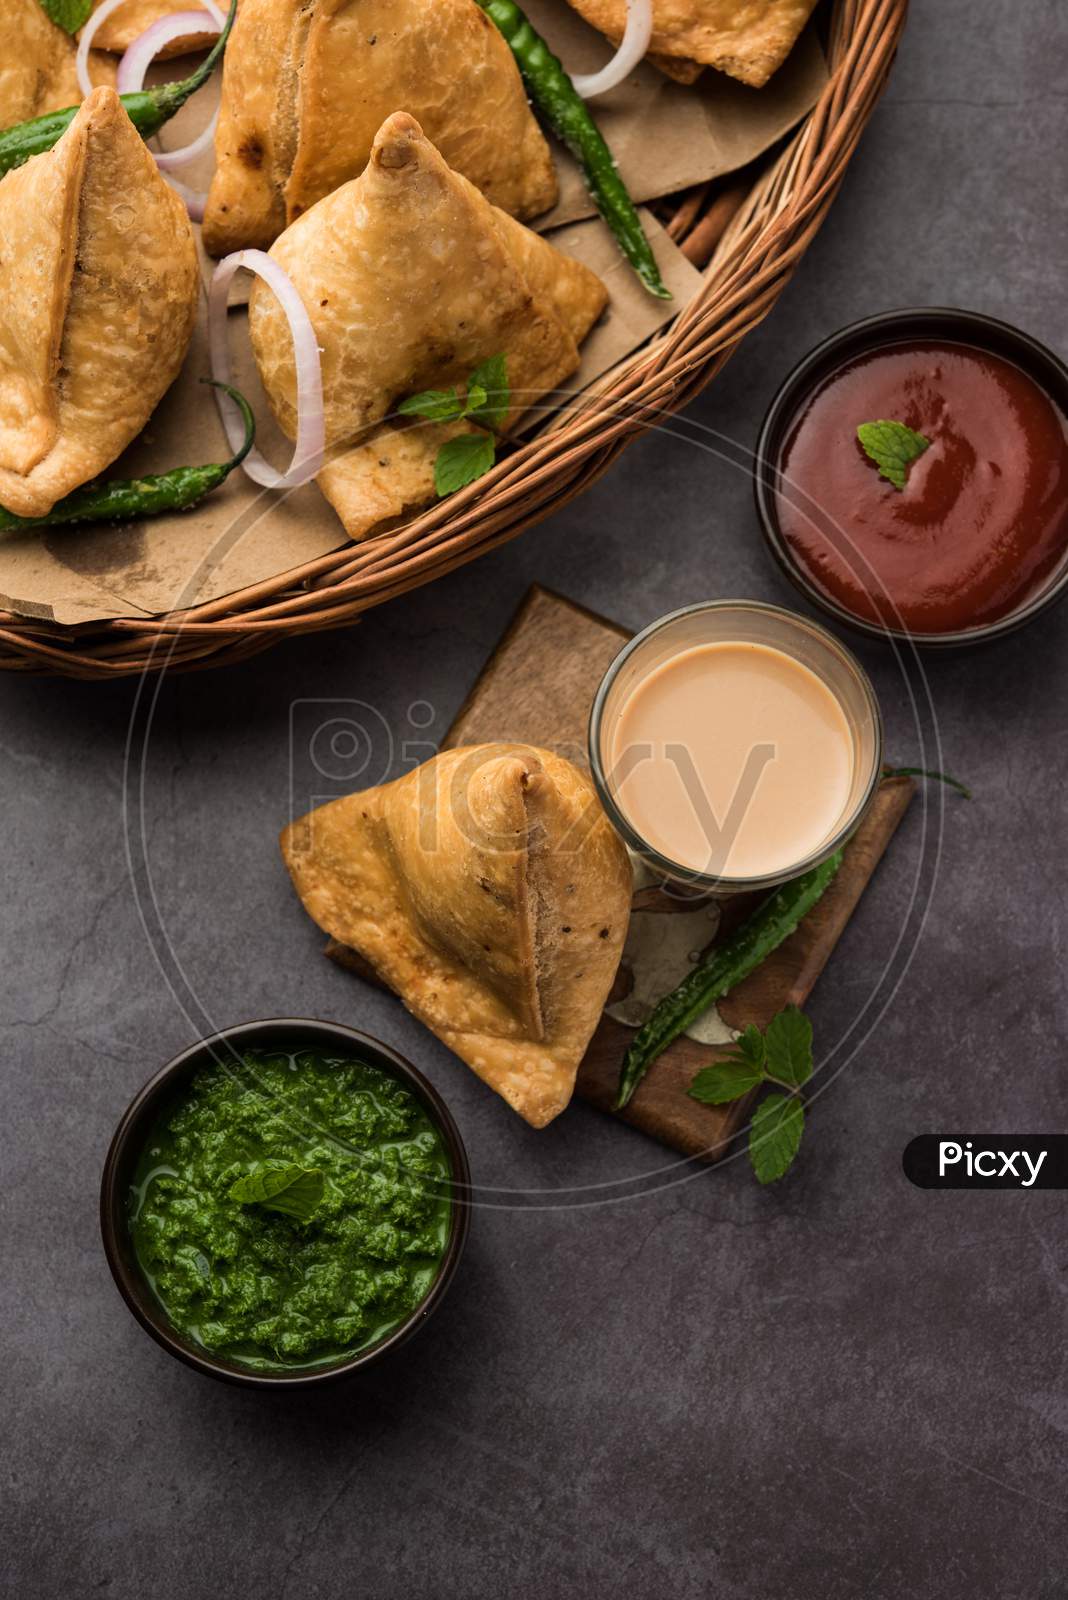 Samosa Snack Is An Indian Deep Fried Pastry With A Spiced Filling Usually Made With Potatoes, Spices And Herb